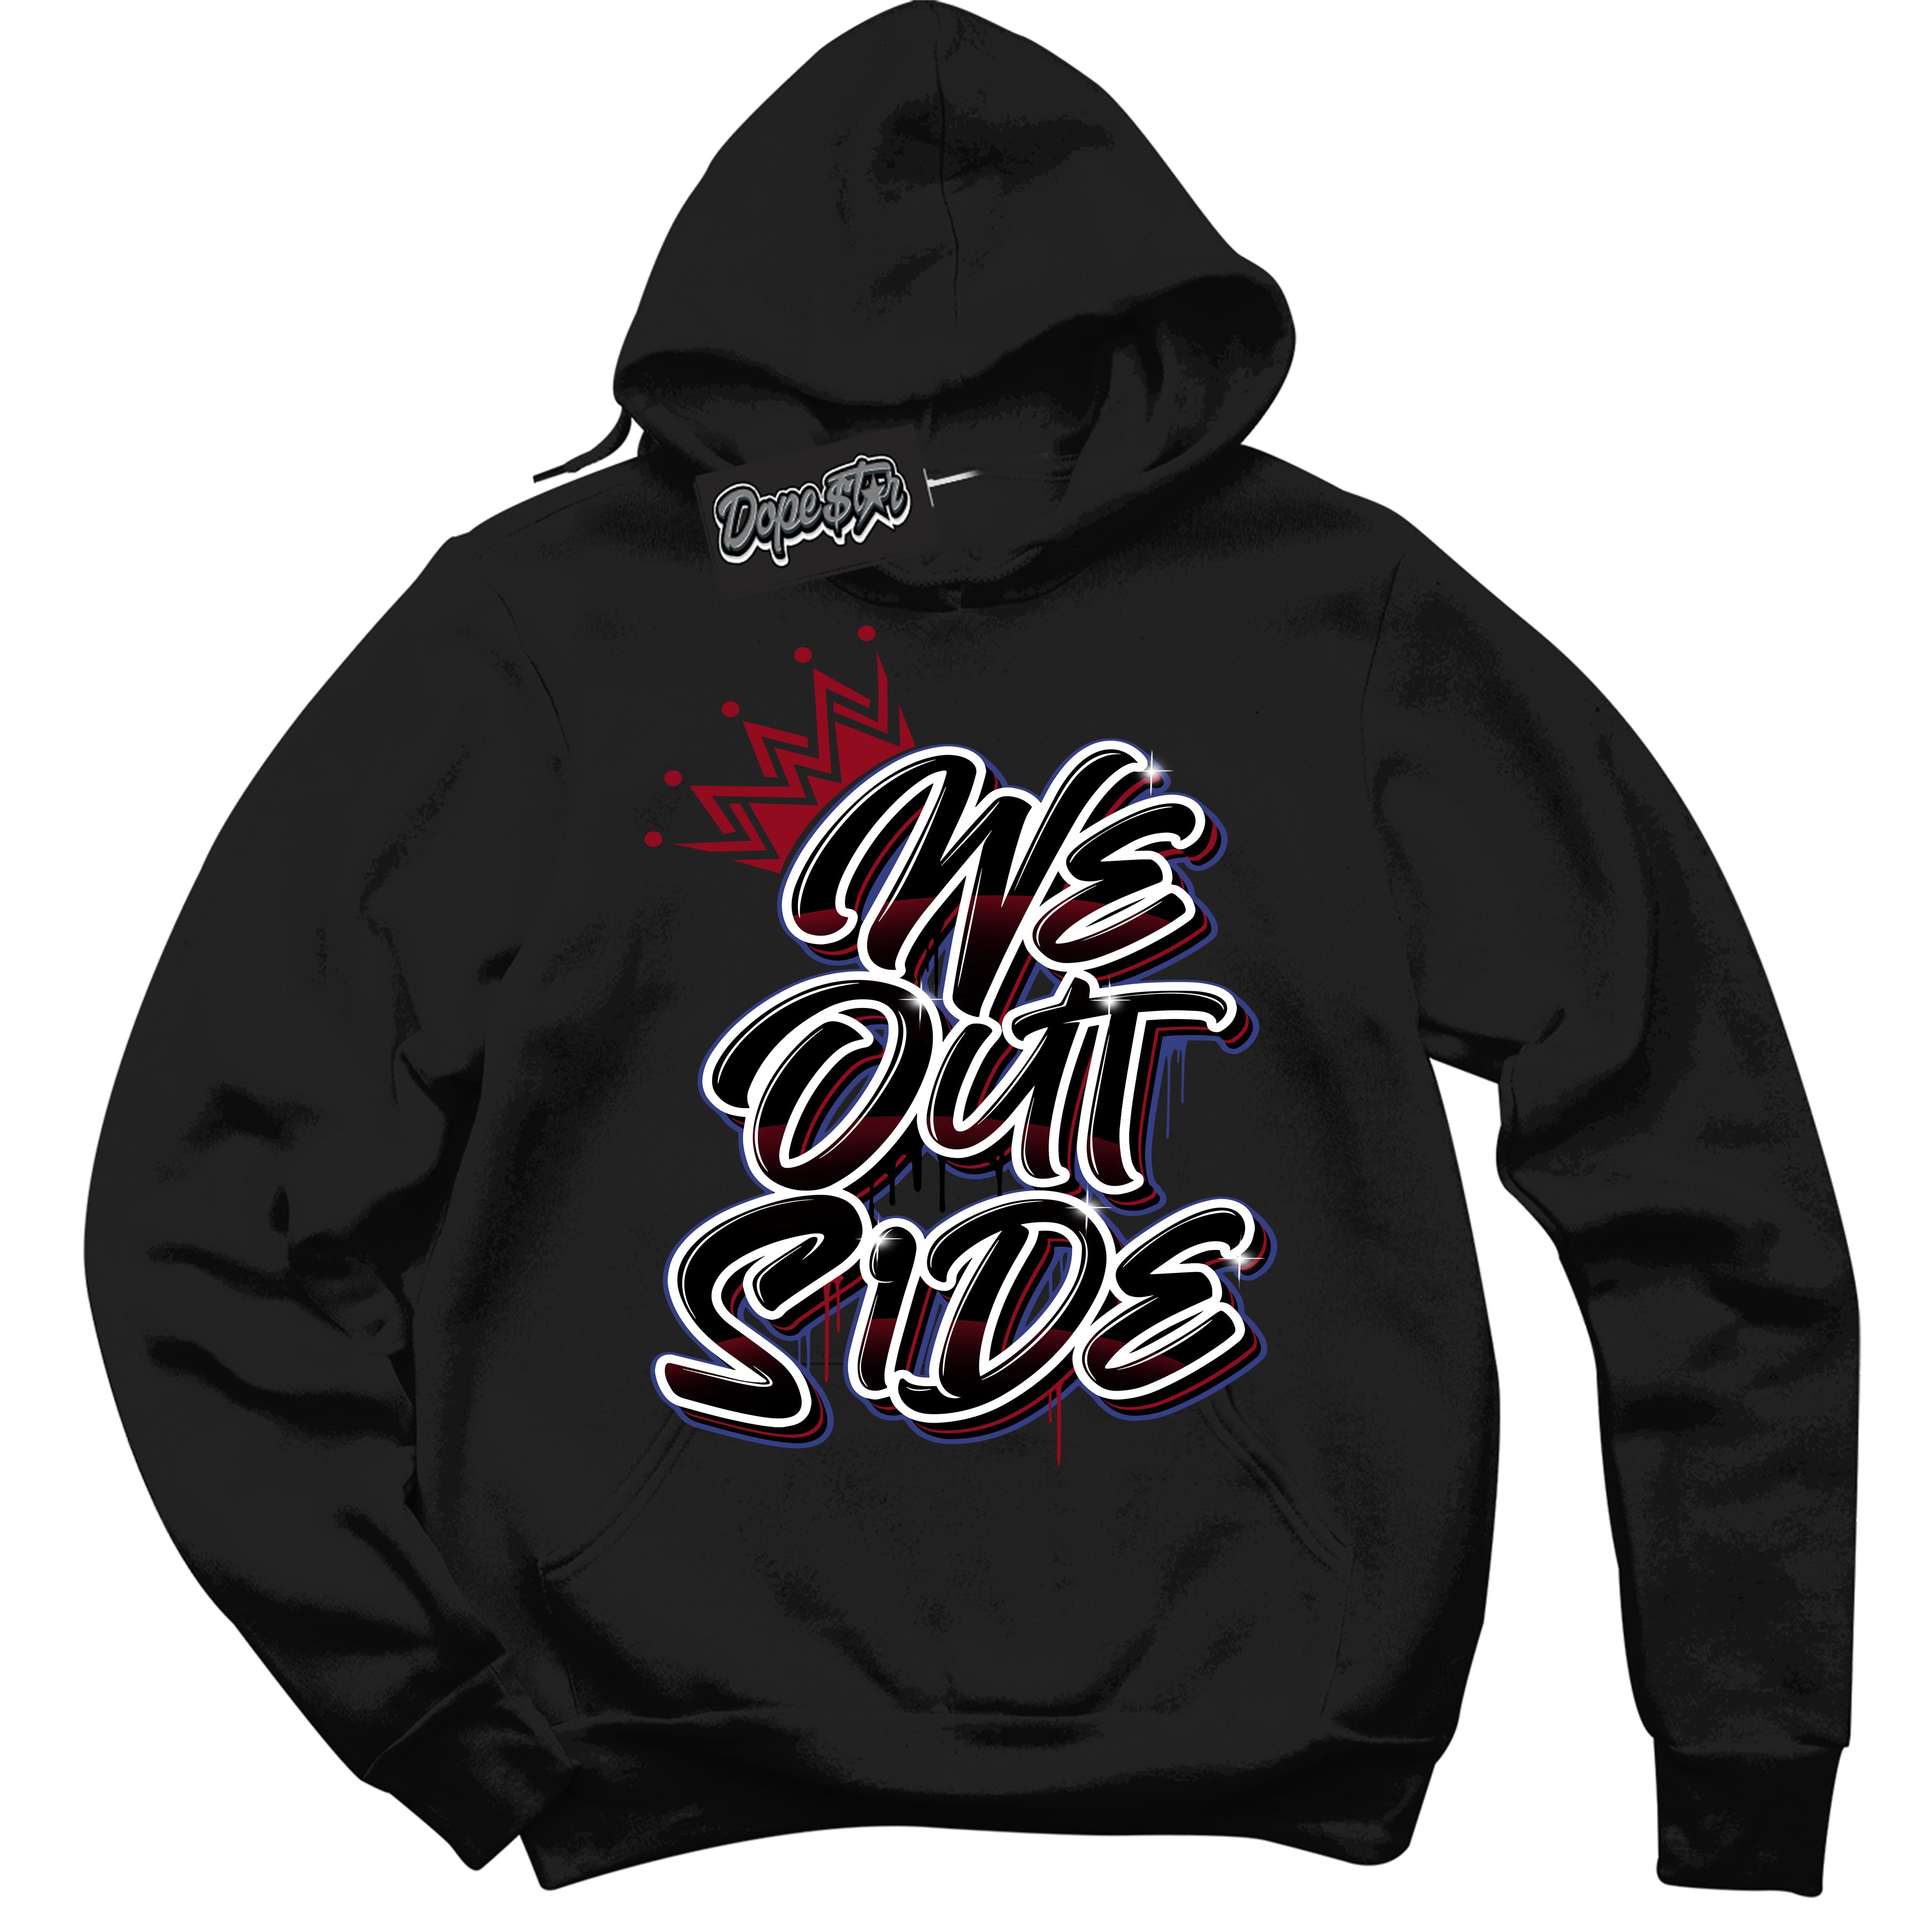 Cool Black Hoodie with “ We Outside ”  design that Perfectly Matches Playoffs 8s Sneakers.